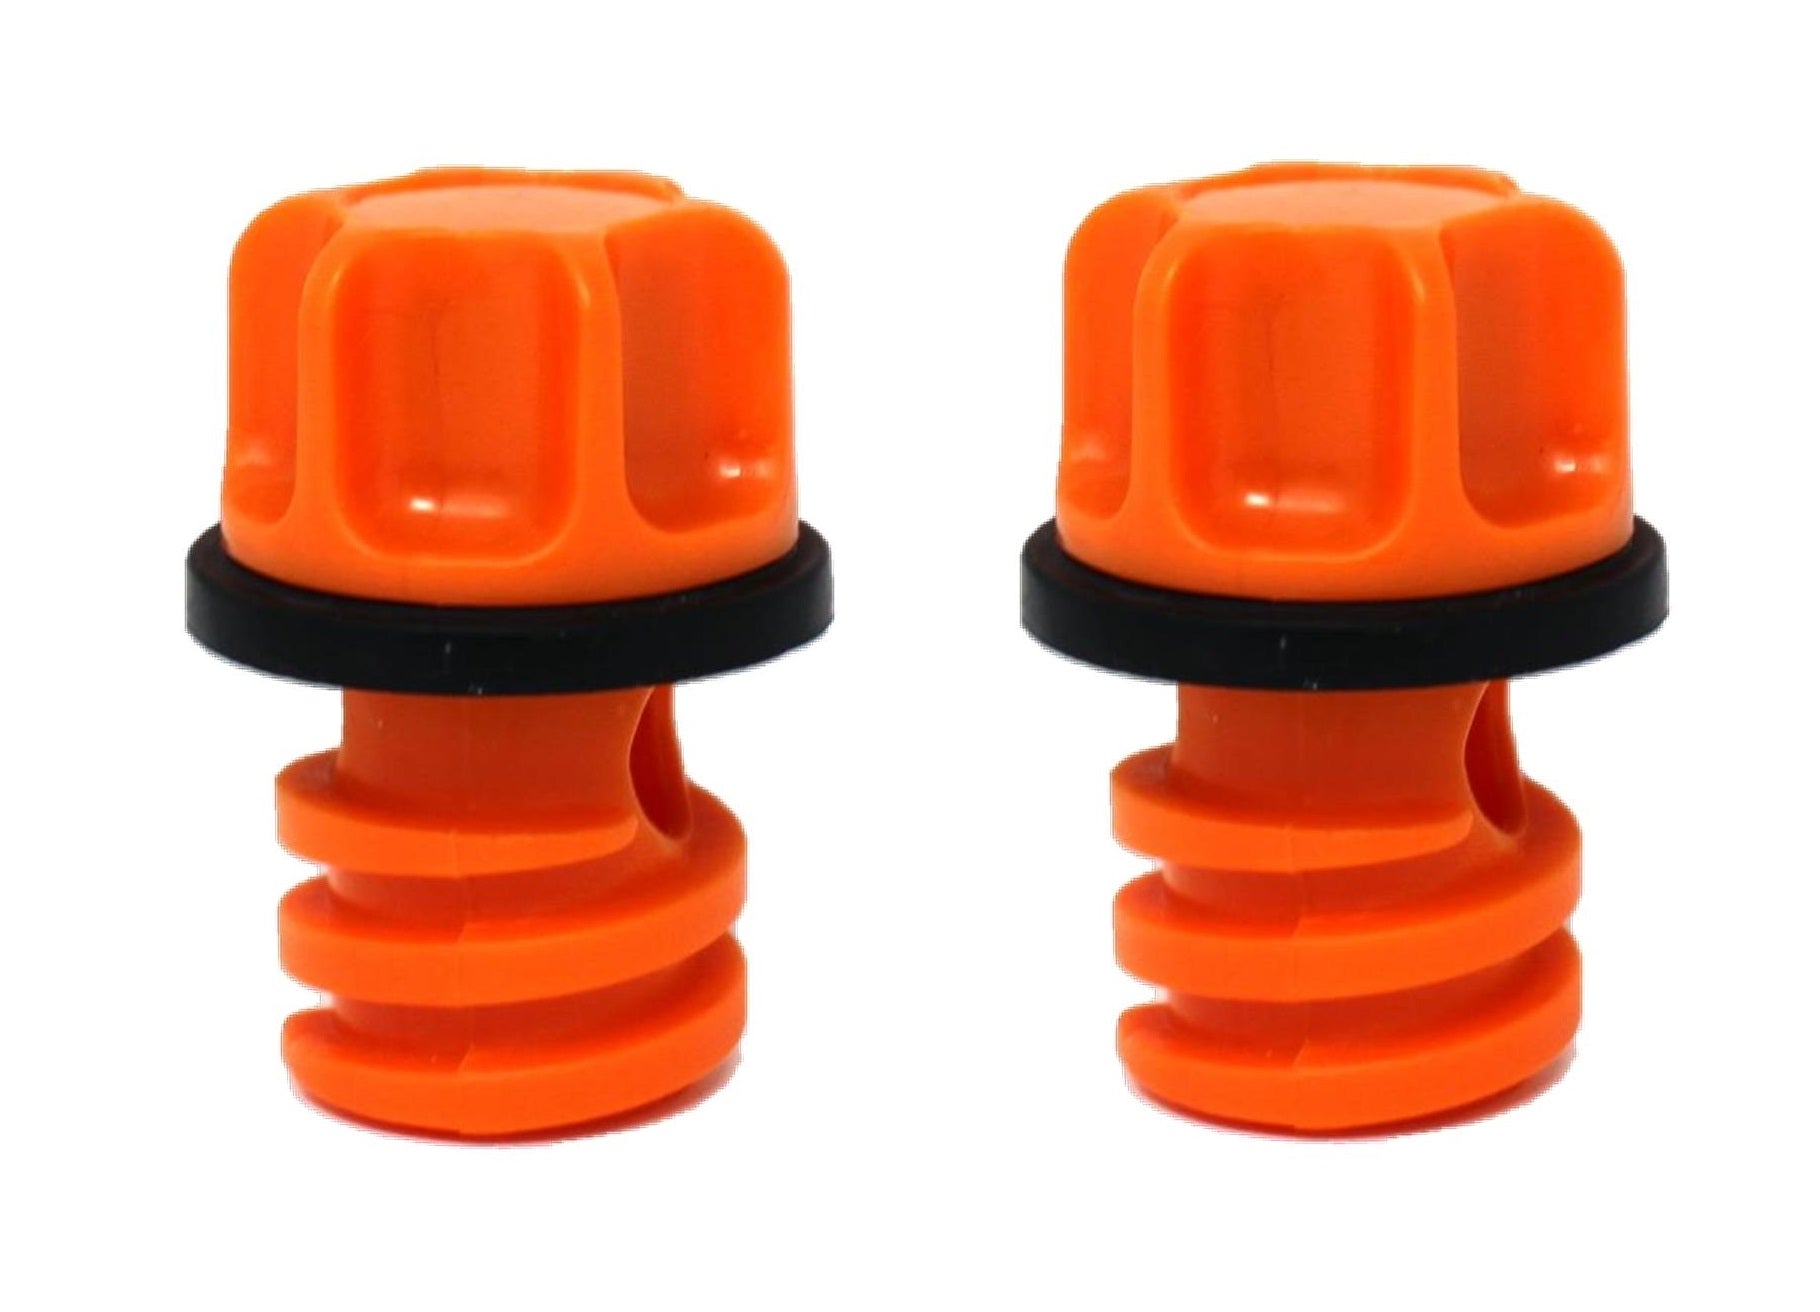 MANWU Cooler Drain Plugs Lid T Latch Straps Handles Replacement for RTIC Yeti Coolers Leak-Proof Accessories Parts (2 Pack Orange Straps + 1 Pack